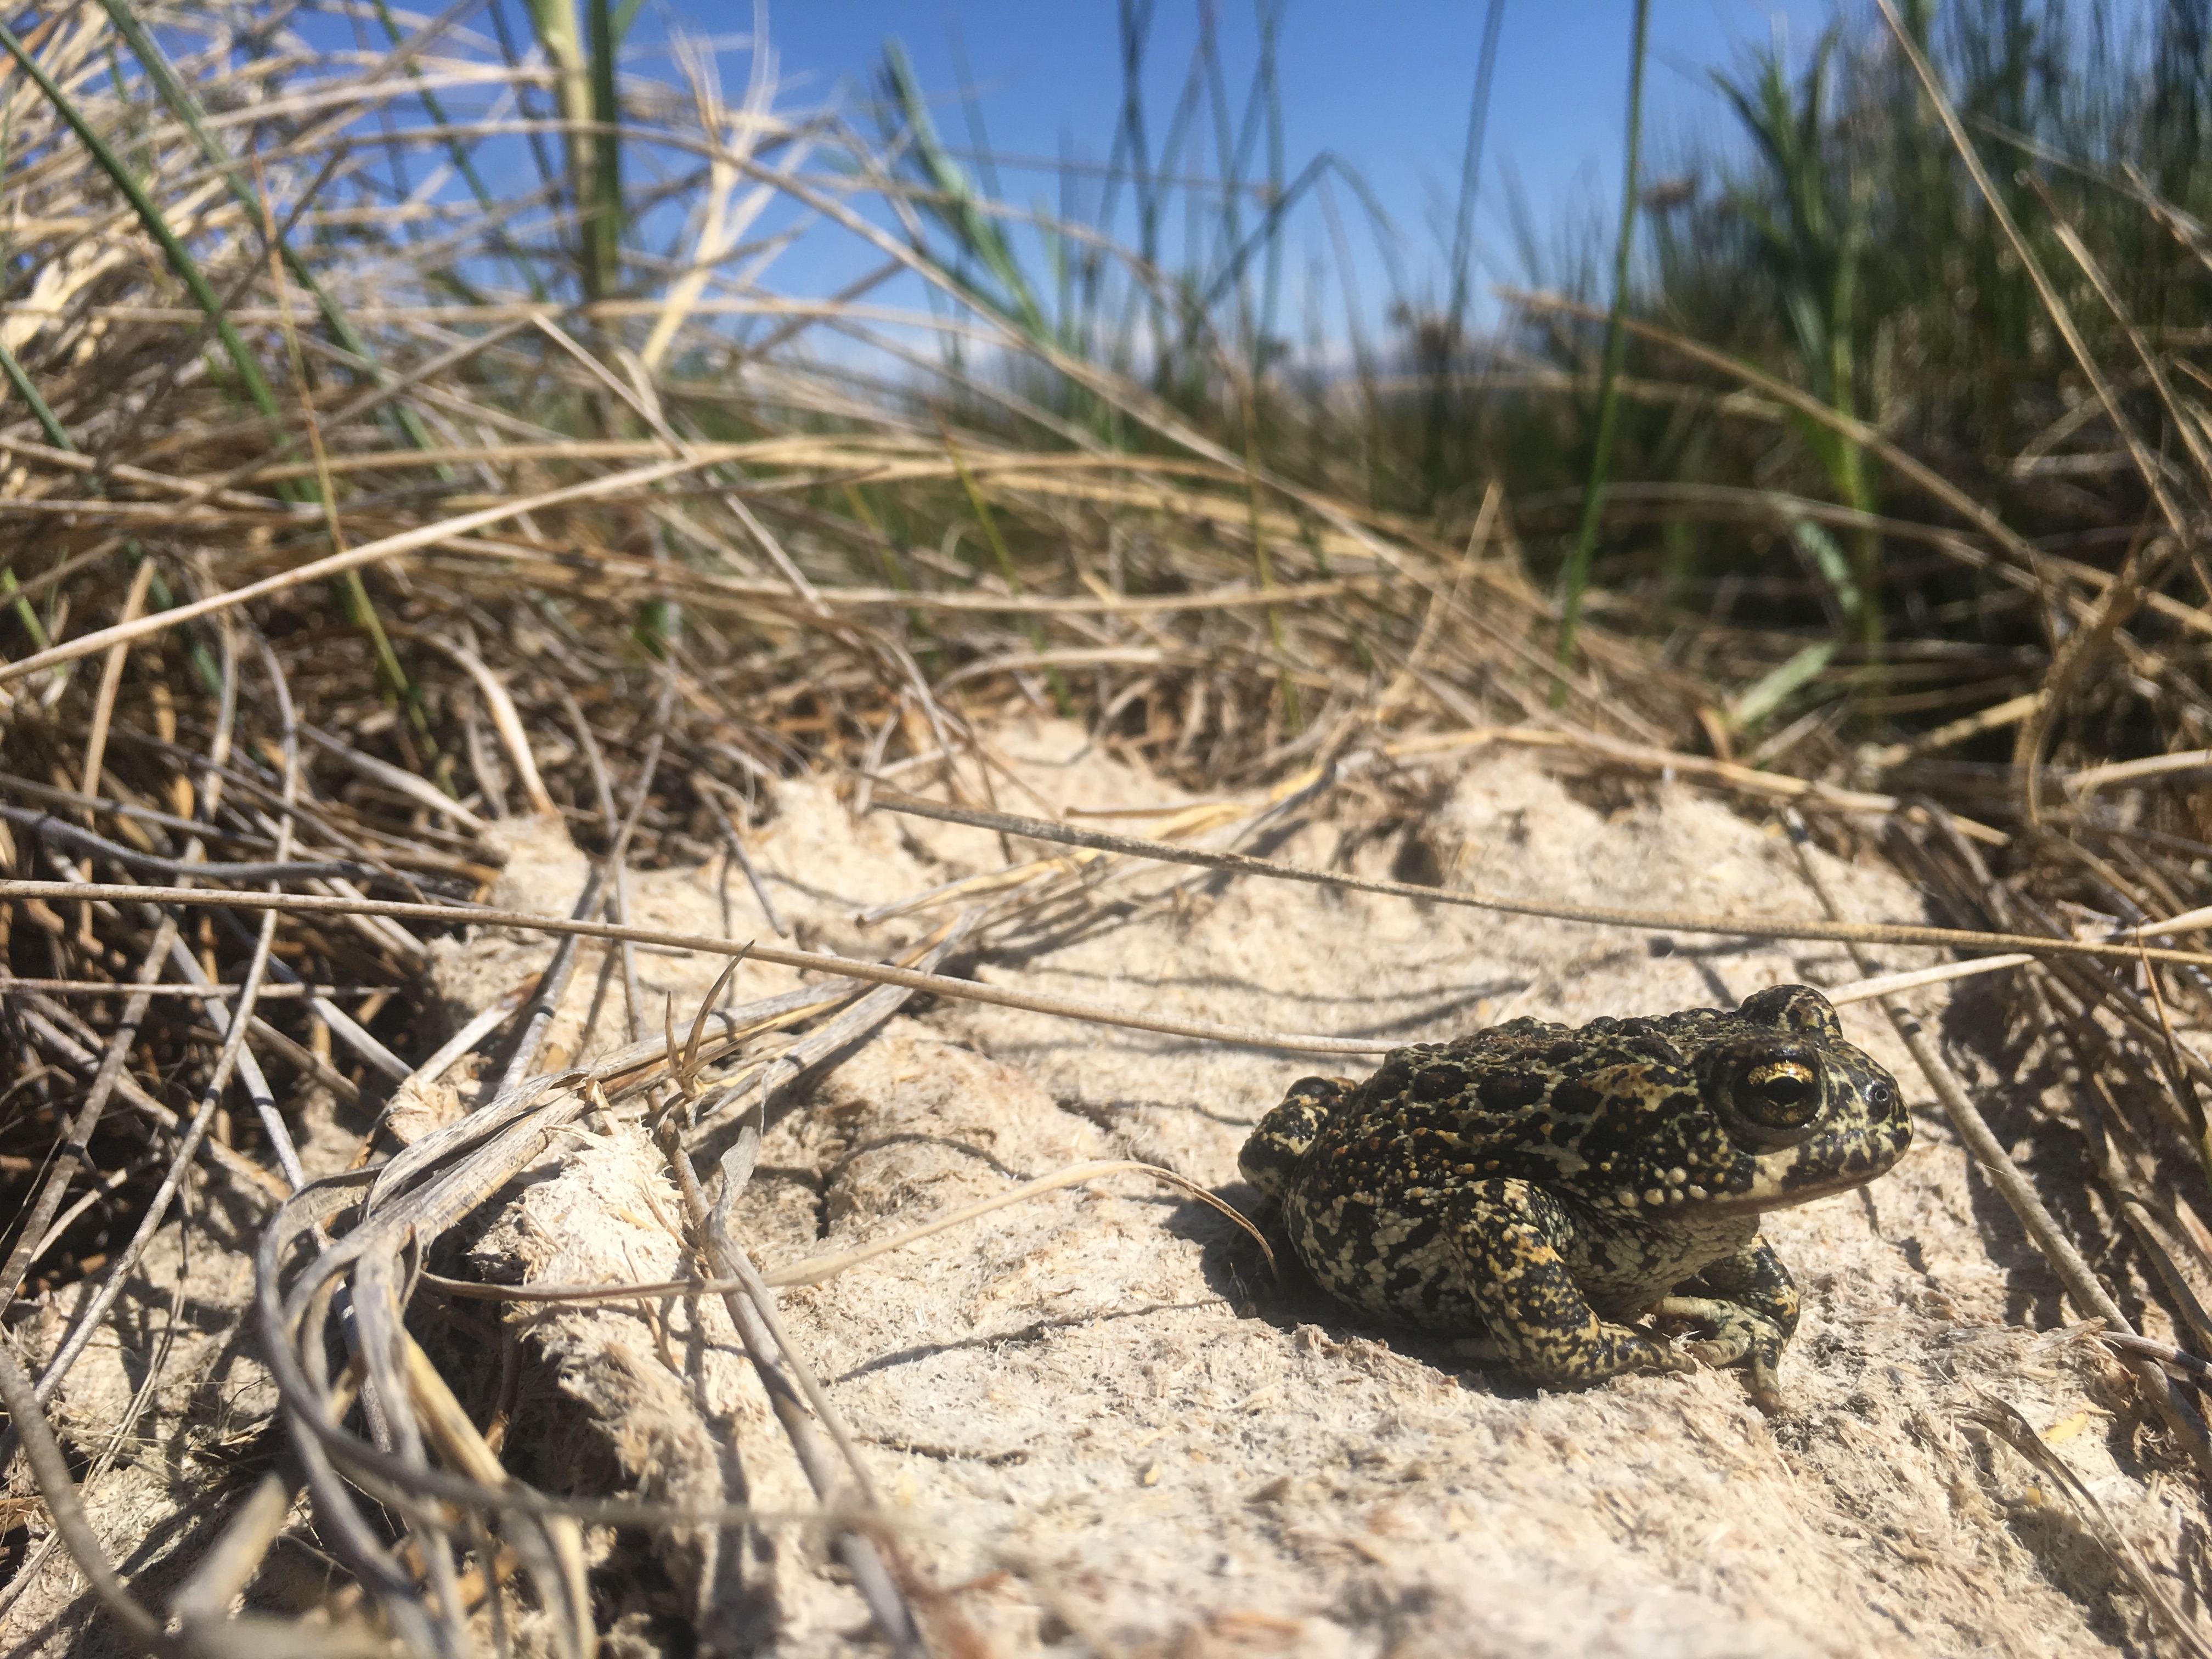 Adult Dixie Valley toad, <em>Anaxyrus williamsi</em><br />Photo by: Kelsey Ruehling, USGS